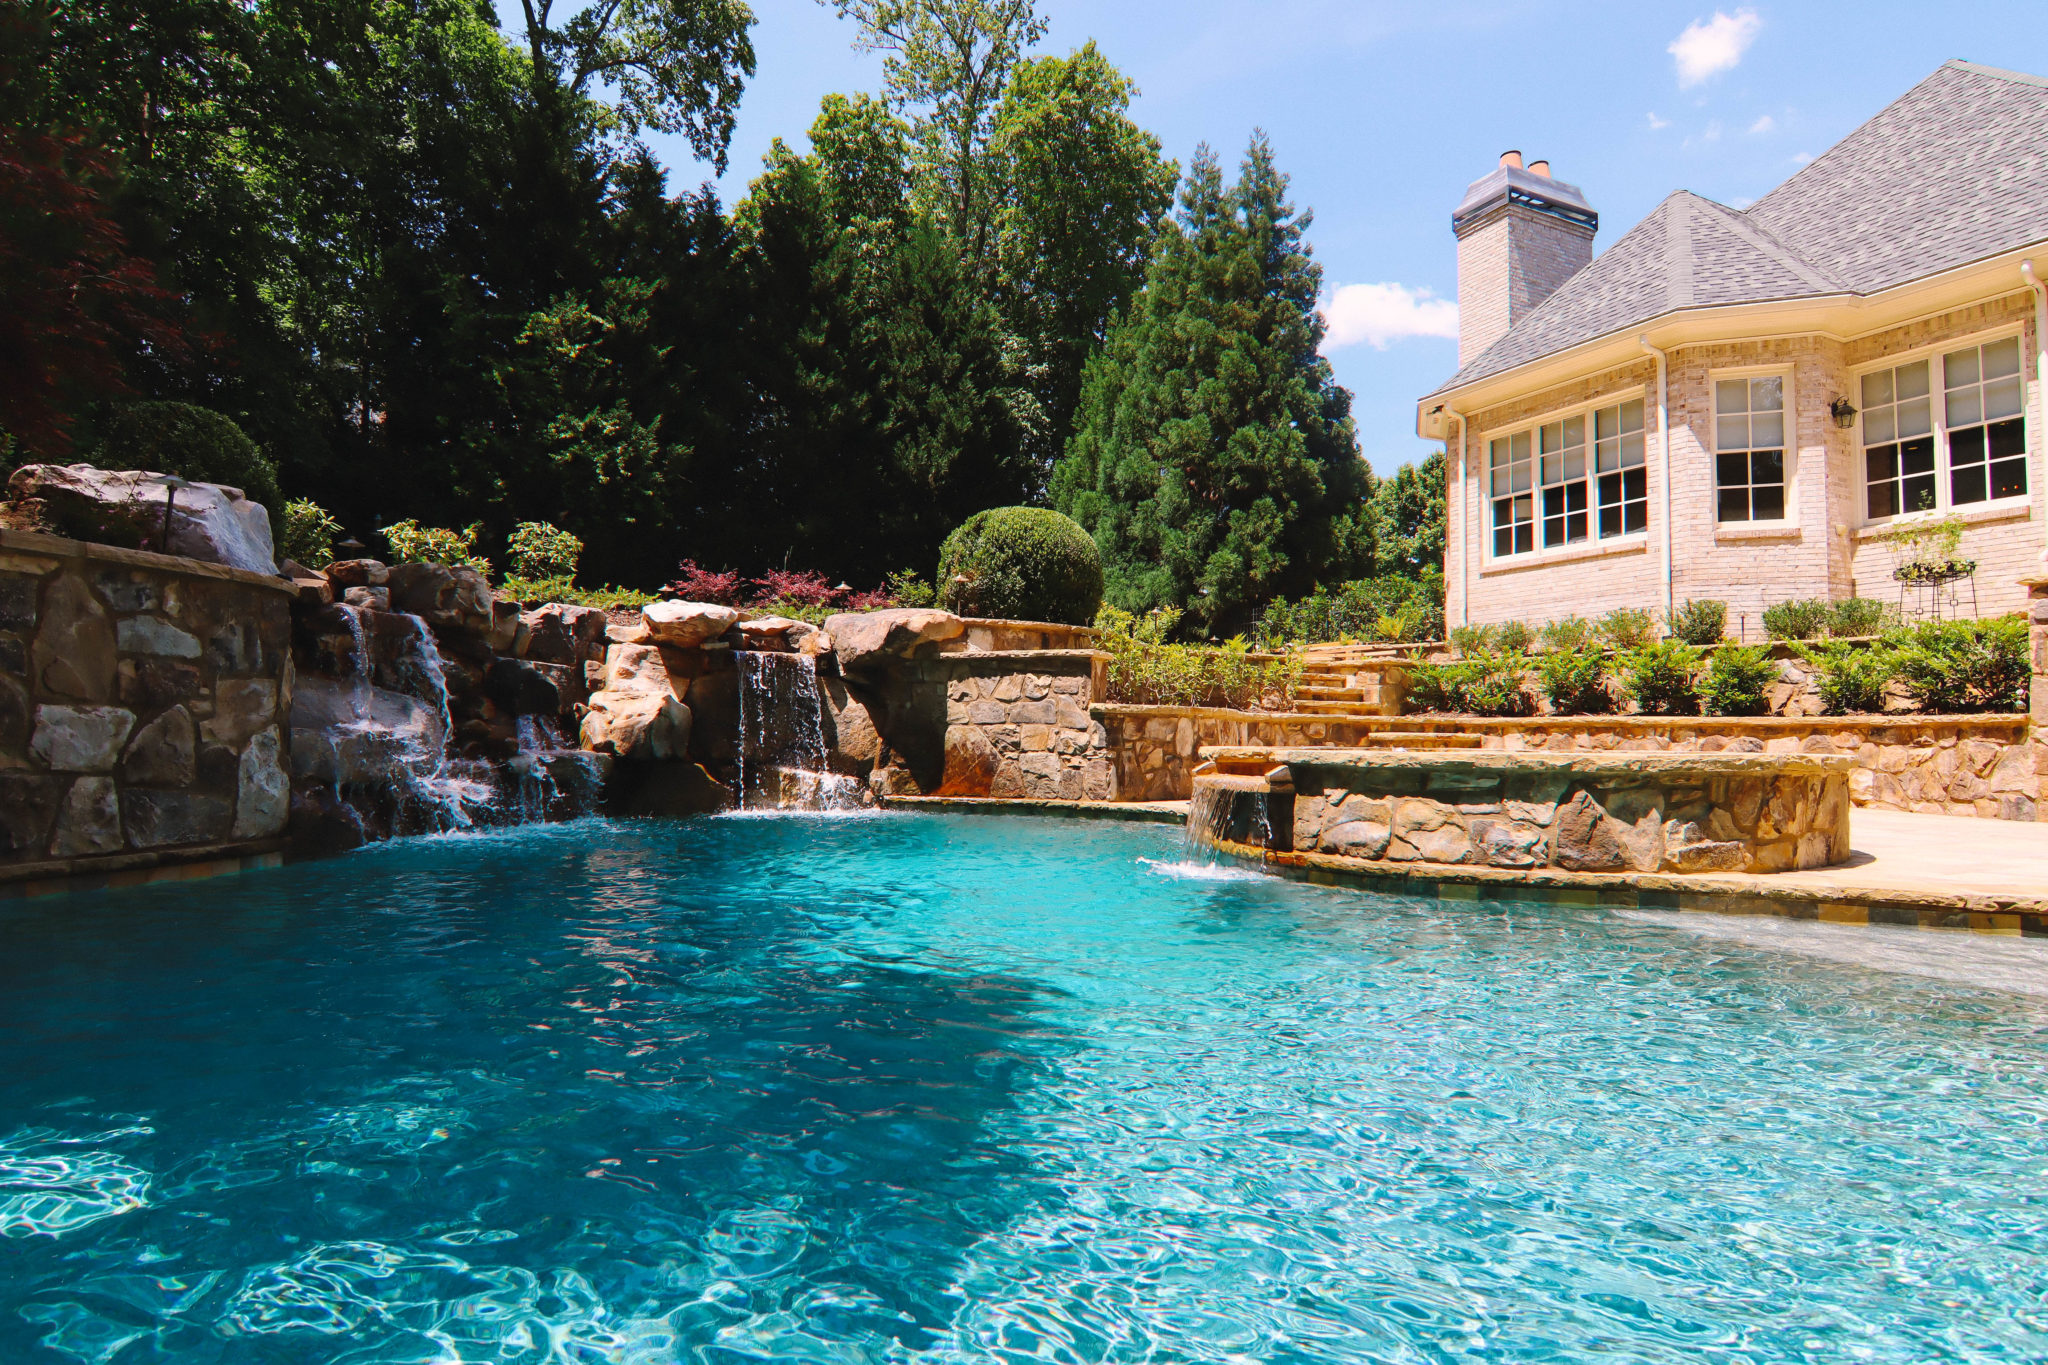 A picturesque boulder waterfall flowing into a pool surrounded by lush greenery.